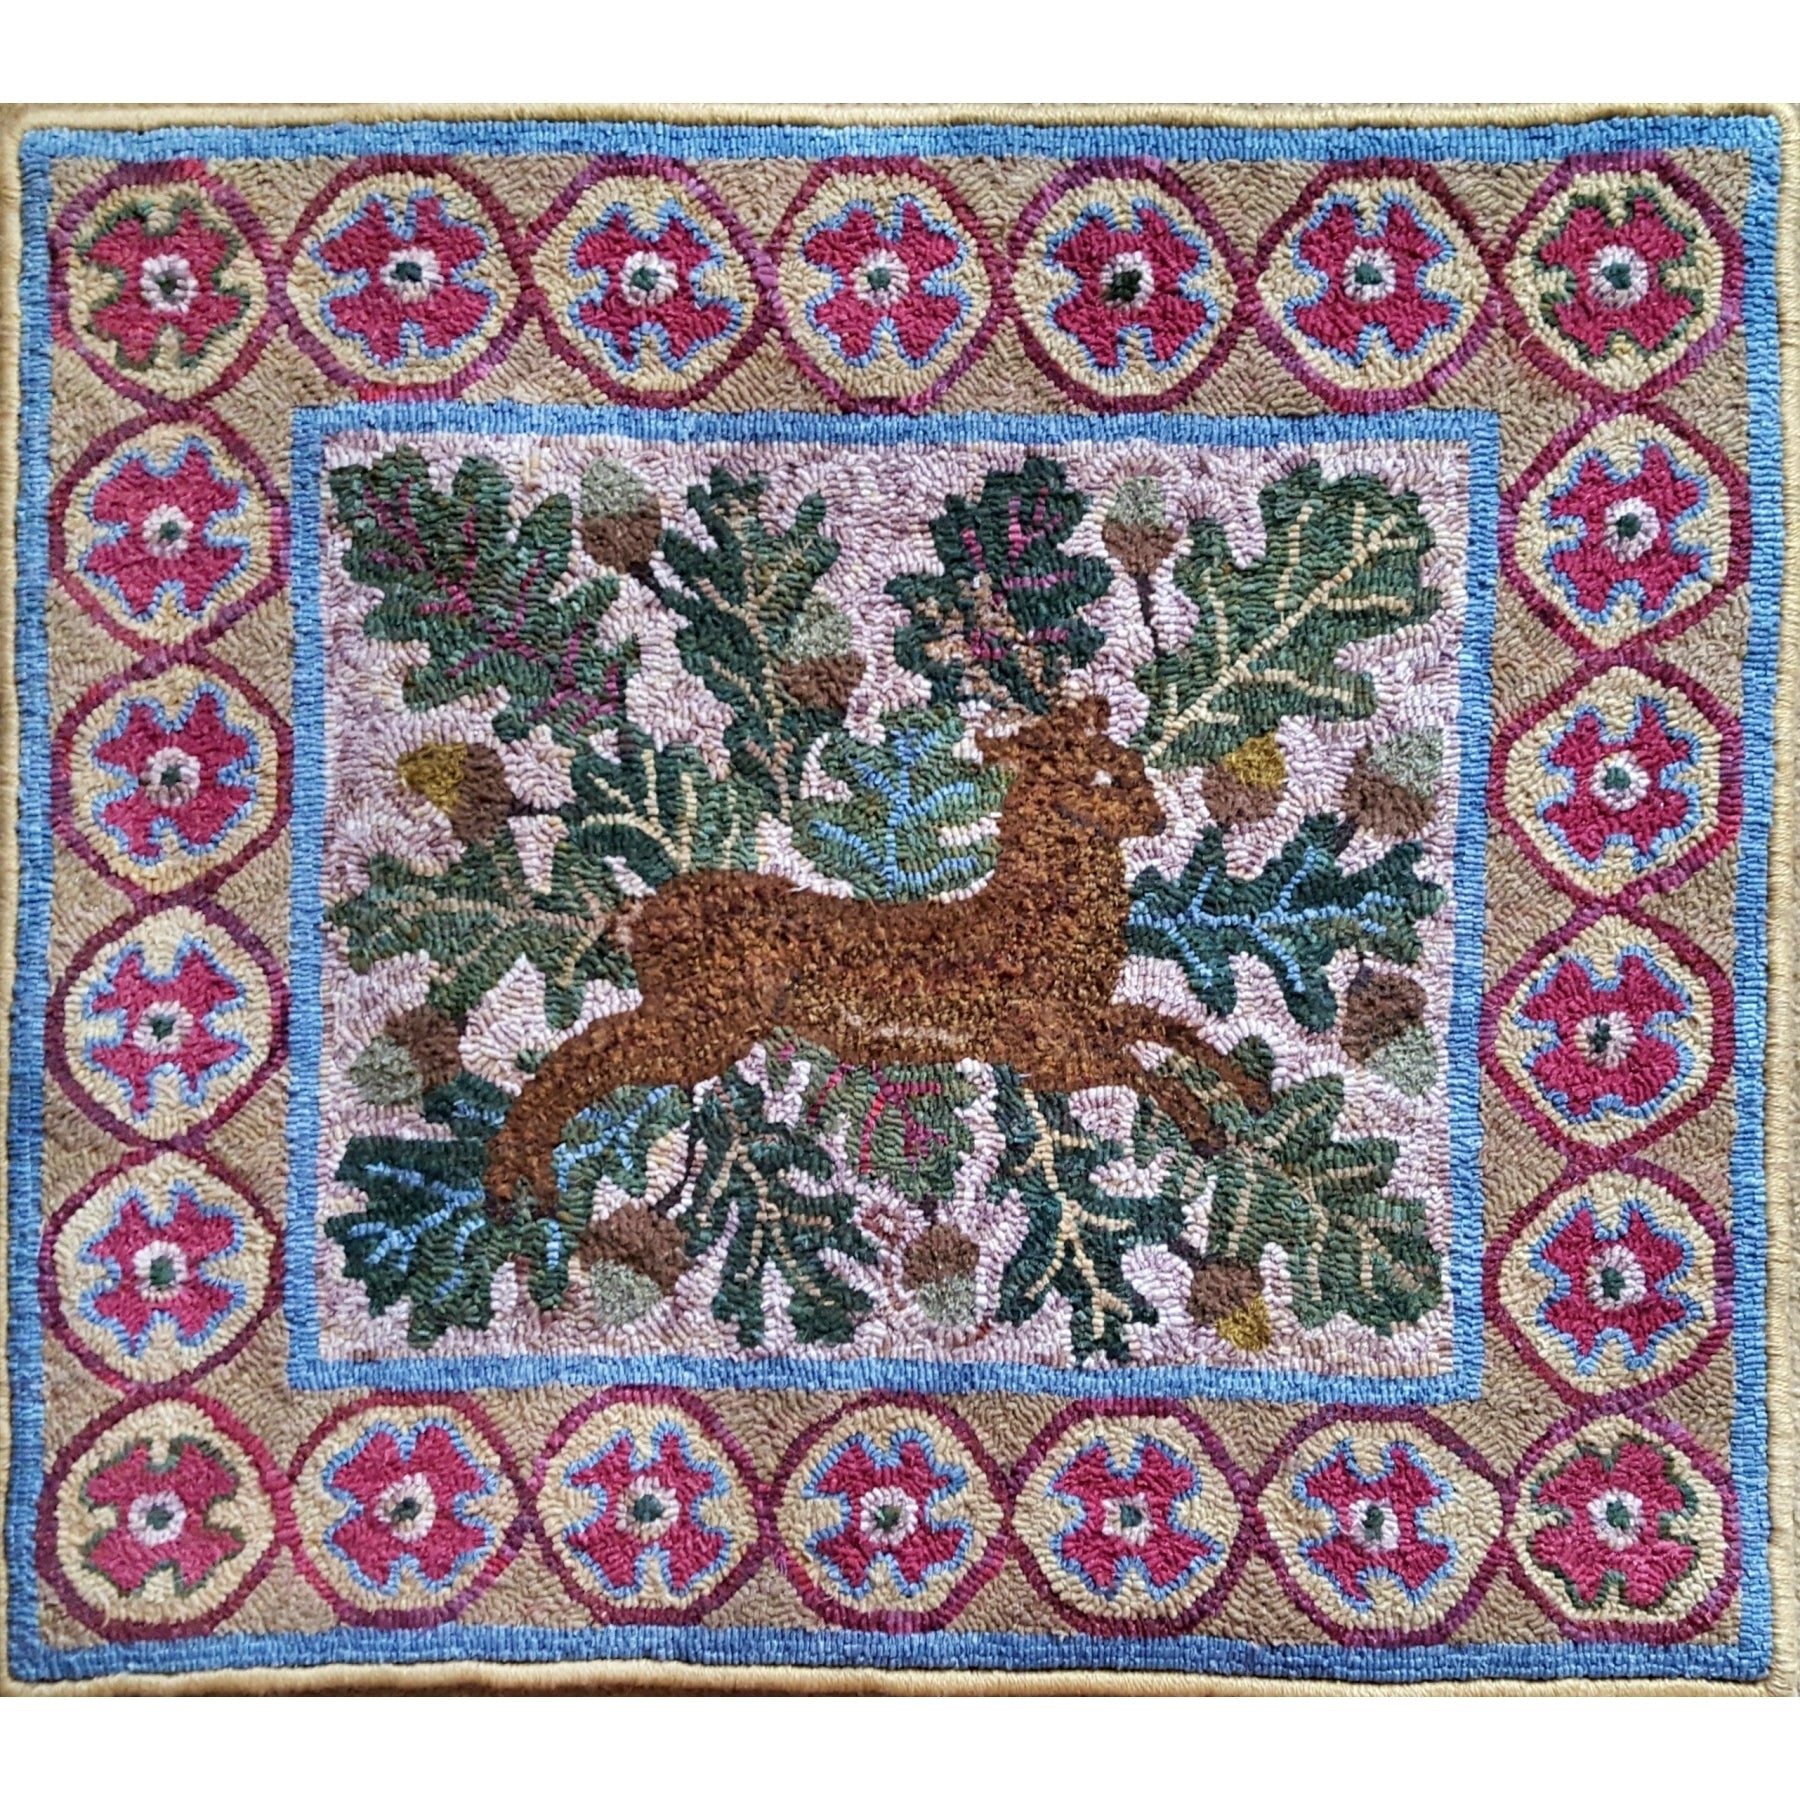 English Stag, rug hooked by Dawn Hebert